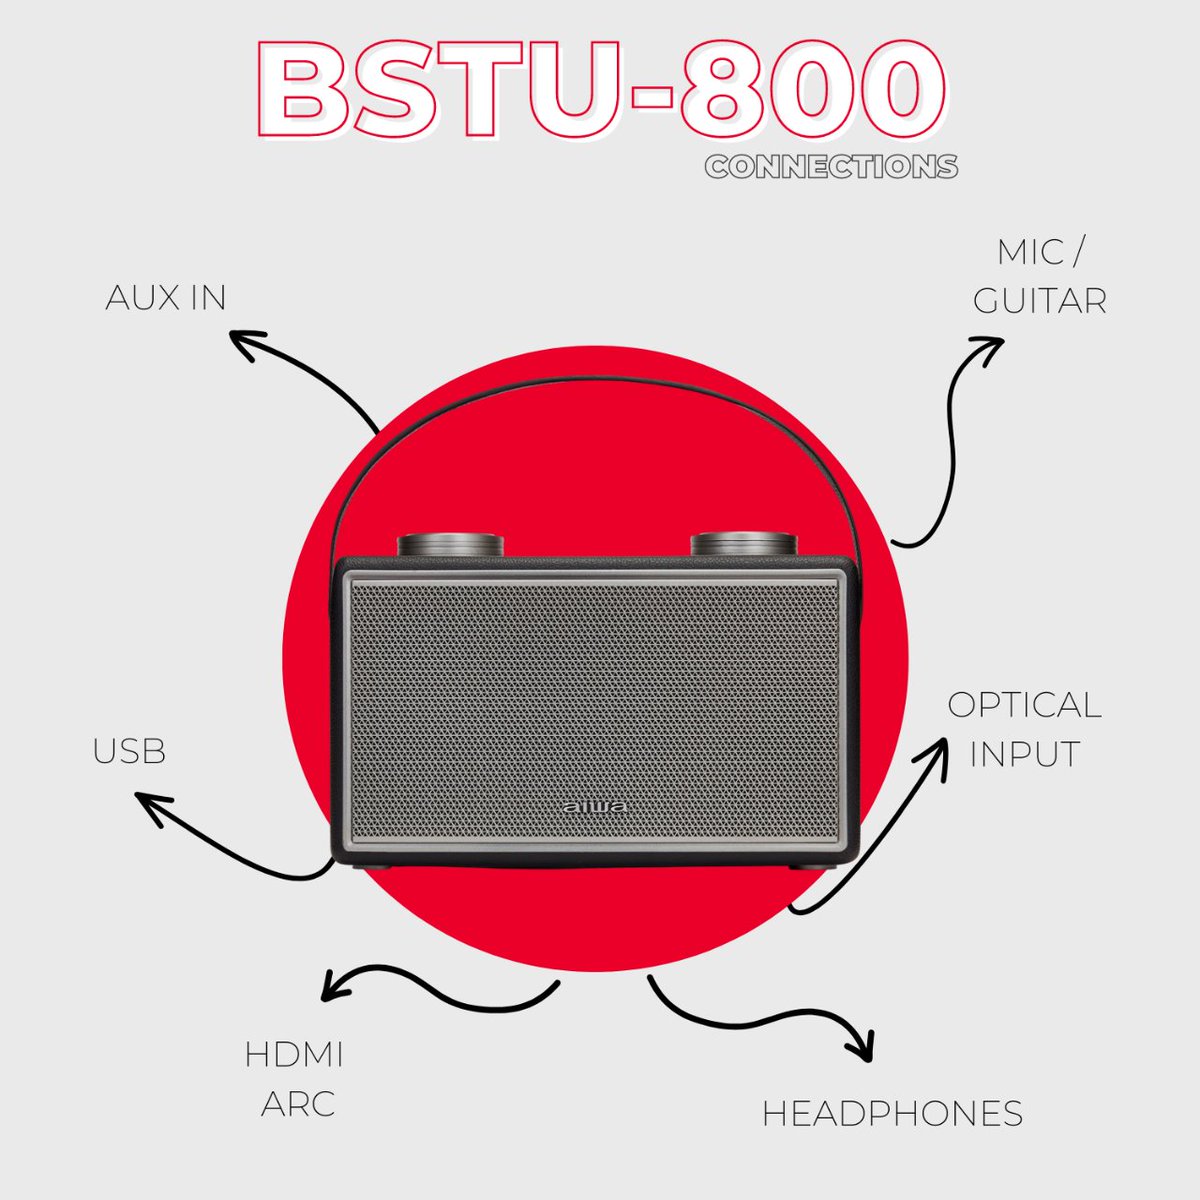 'The most magical connections are not planned'

So keep our BSTU-800 handy. (Lest there be no connection 😉)

#aiwa #aiwaeurope #vintage #legacyofsound #speaker #portablespeaker #speakers #speakerbluetooth #enjoyeverywhere  #90svintage  #80s